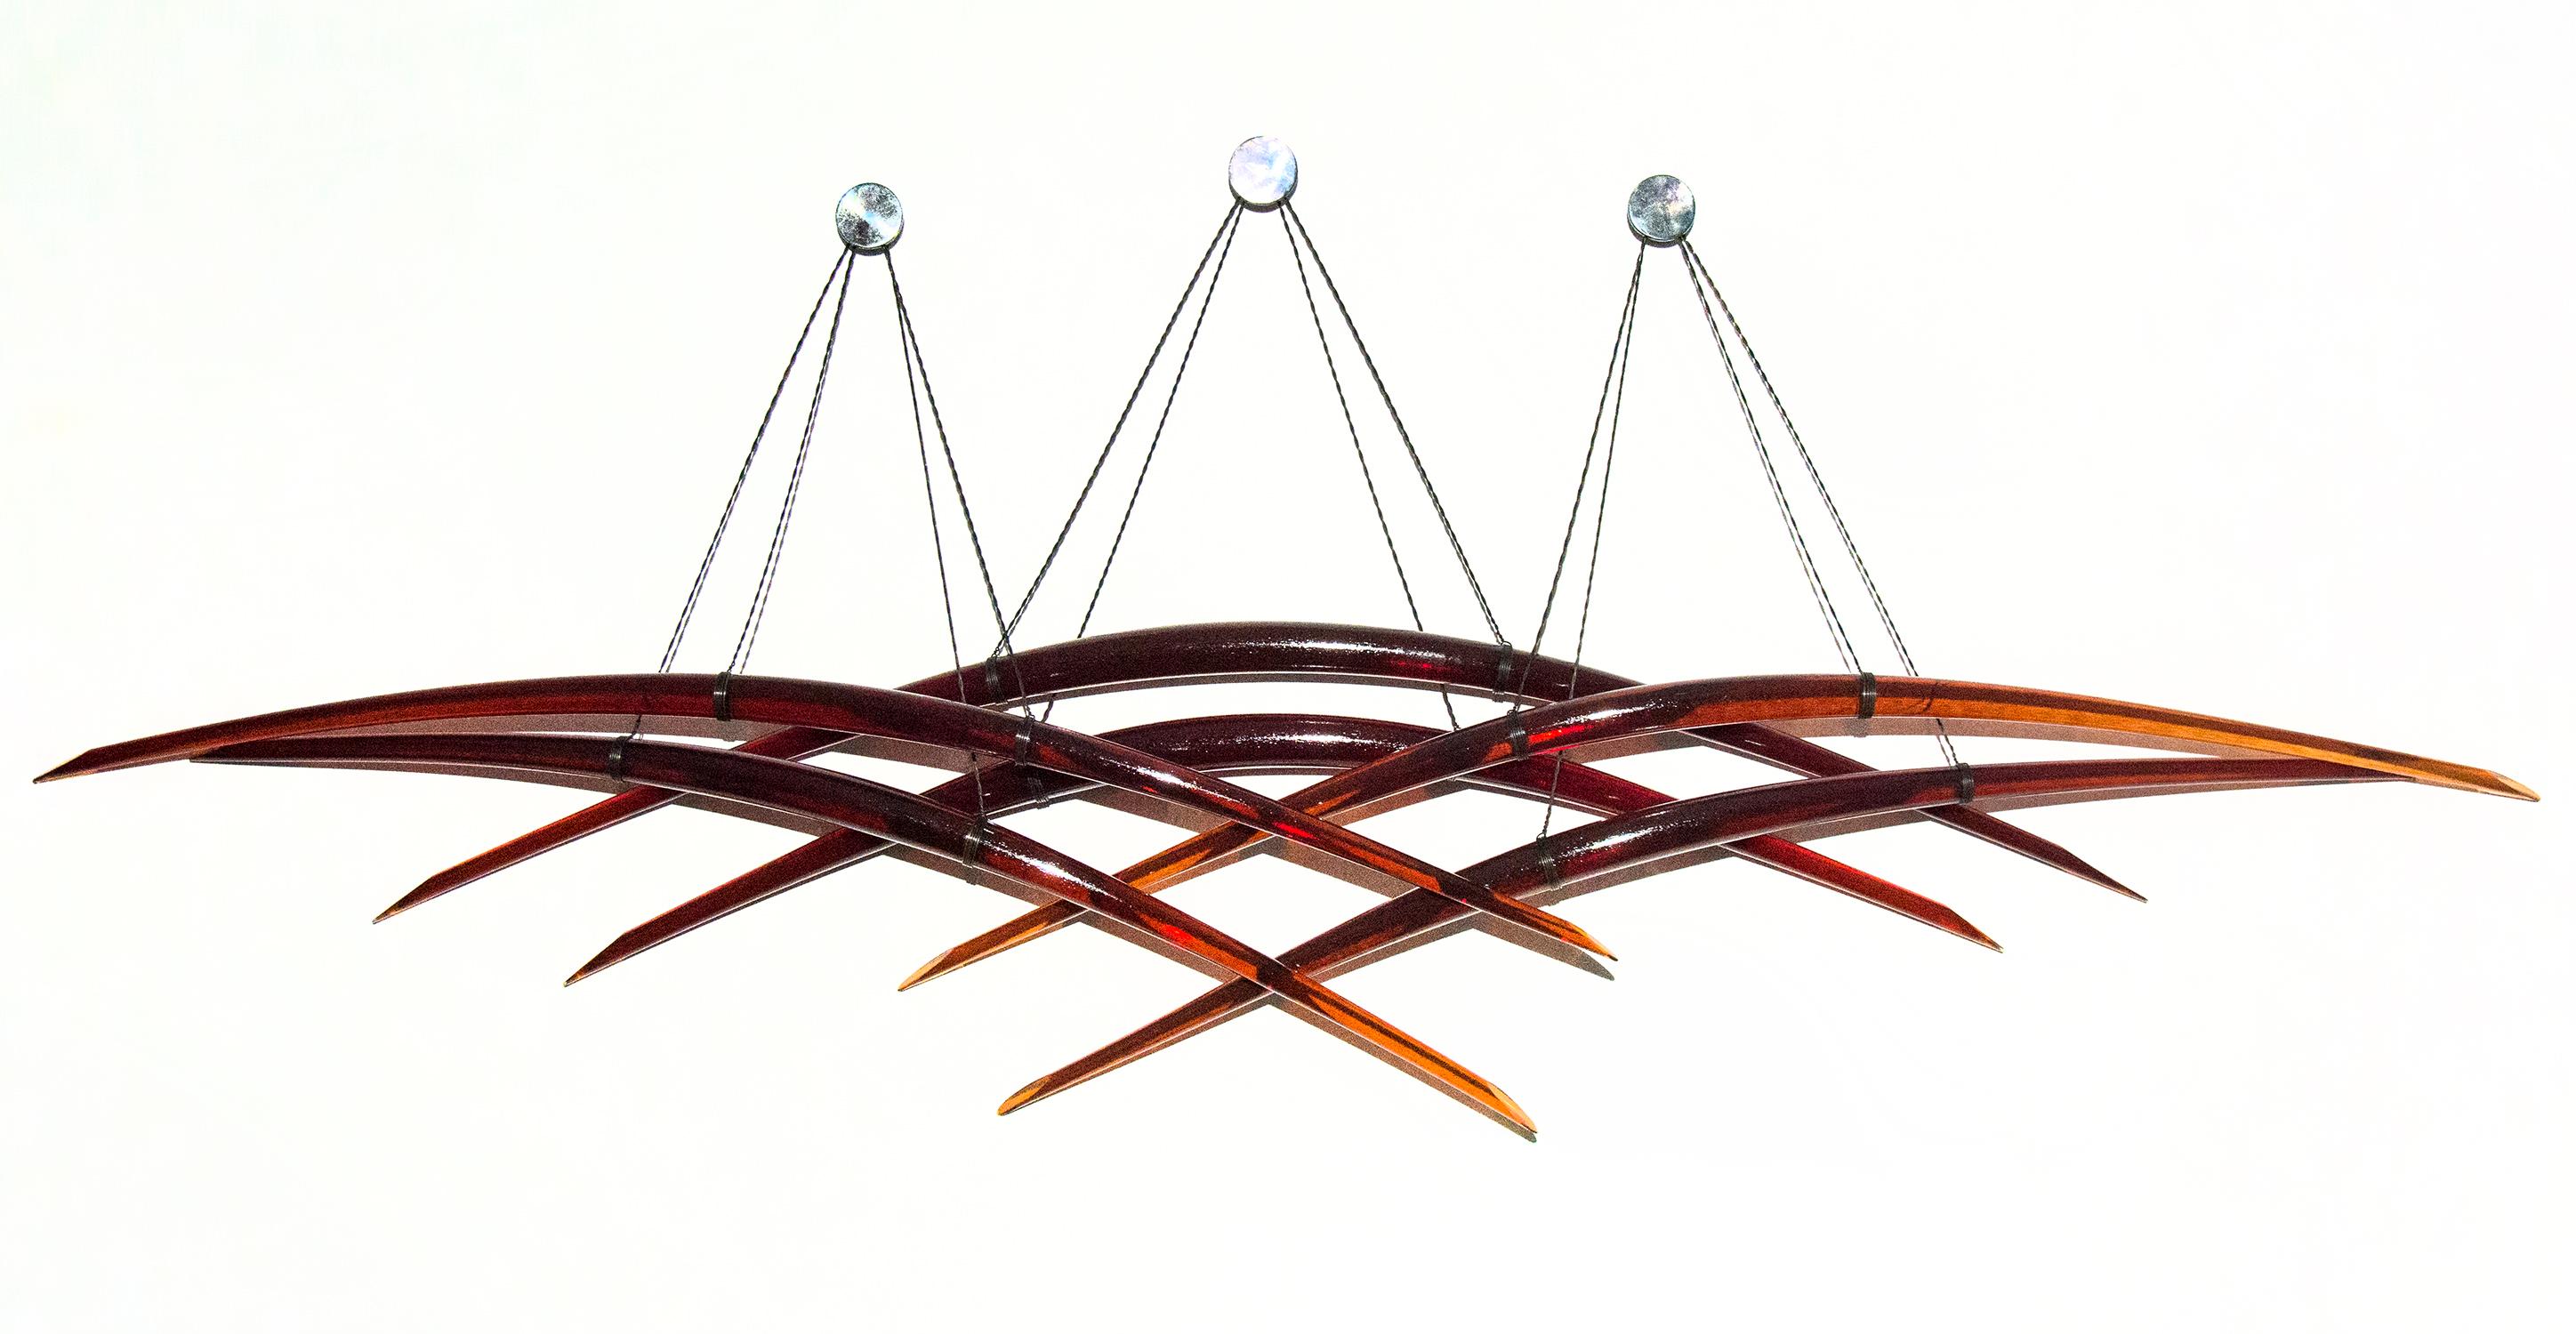 Probability R - red glass, copper, translucent abstract suspended wall sculpture